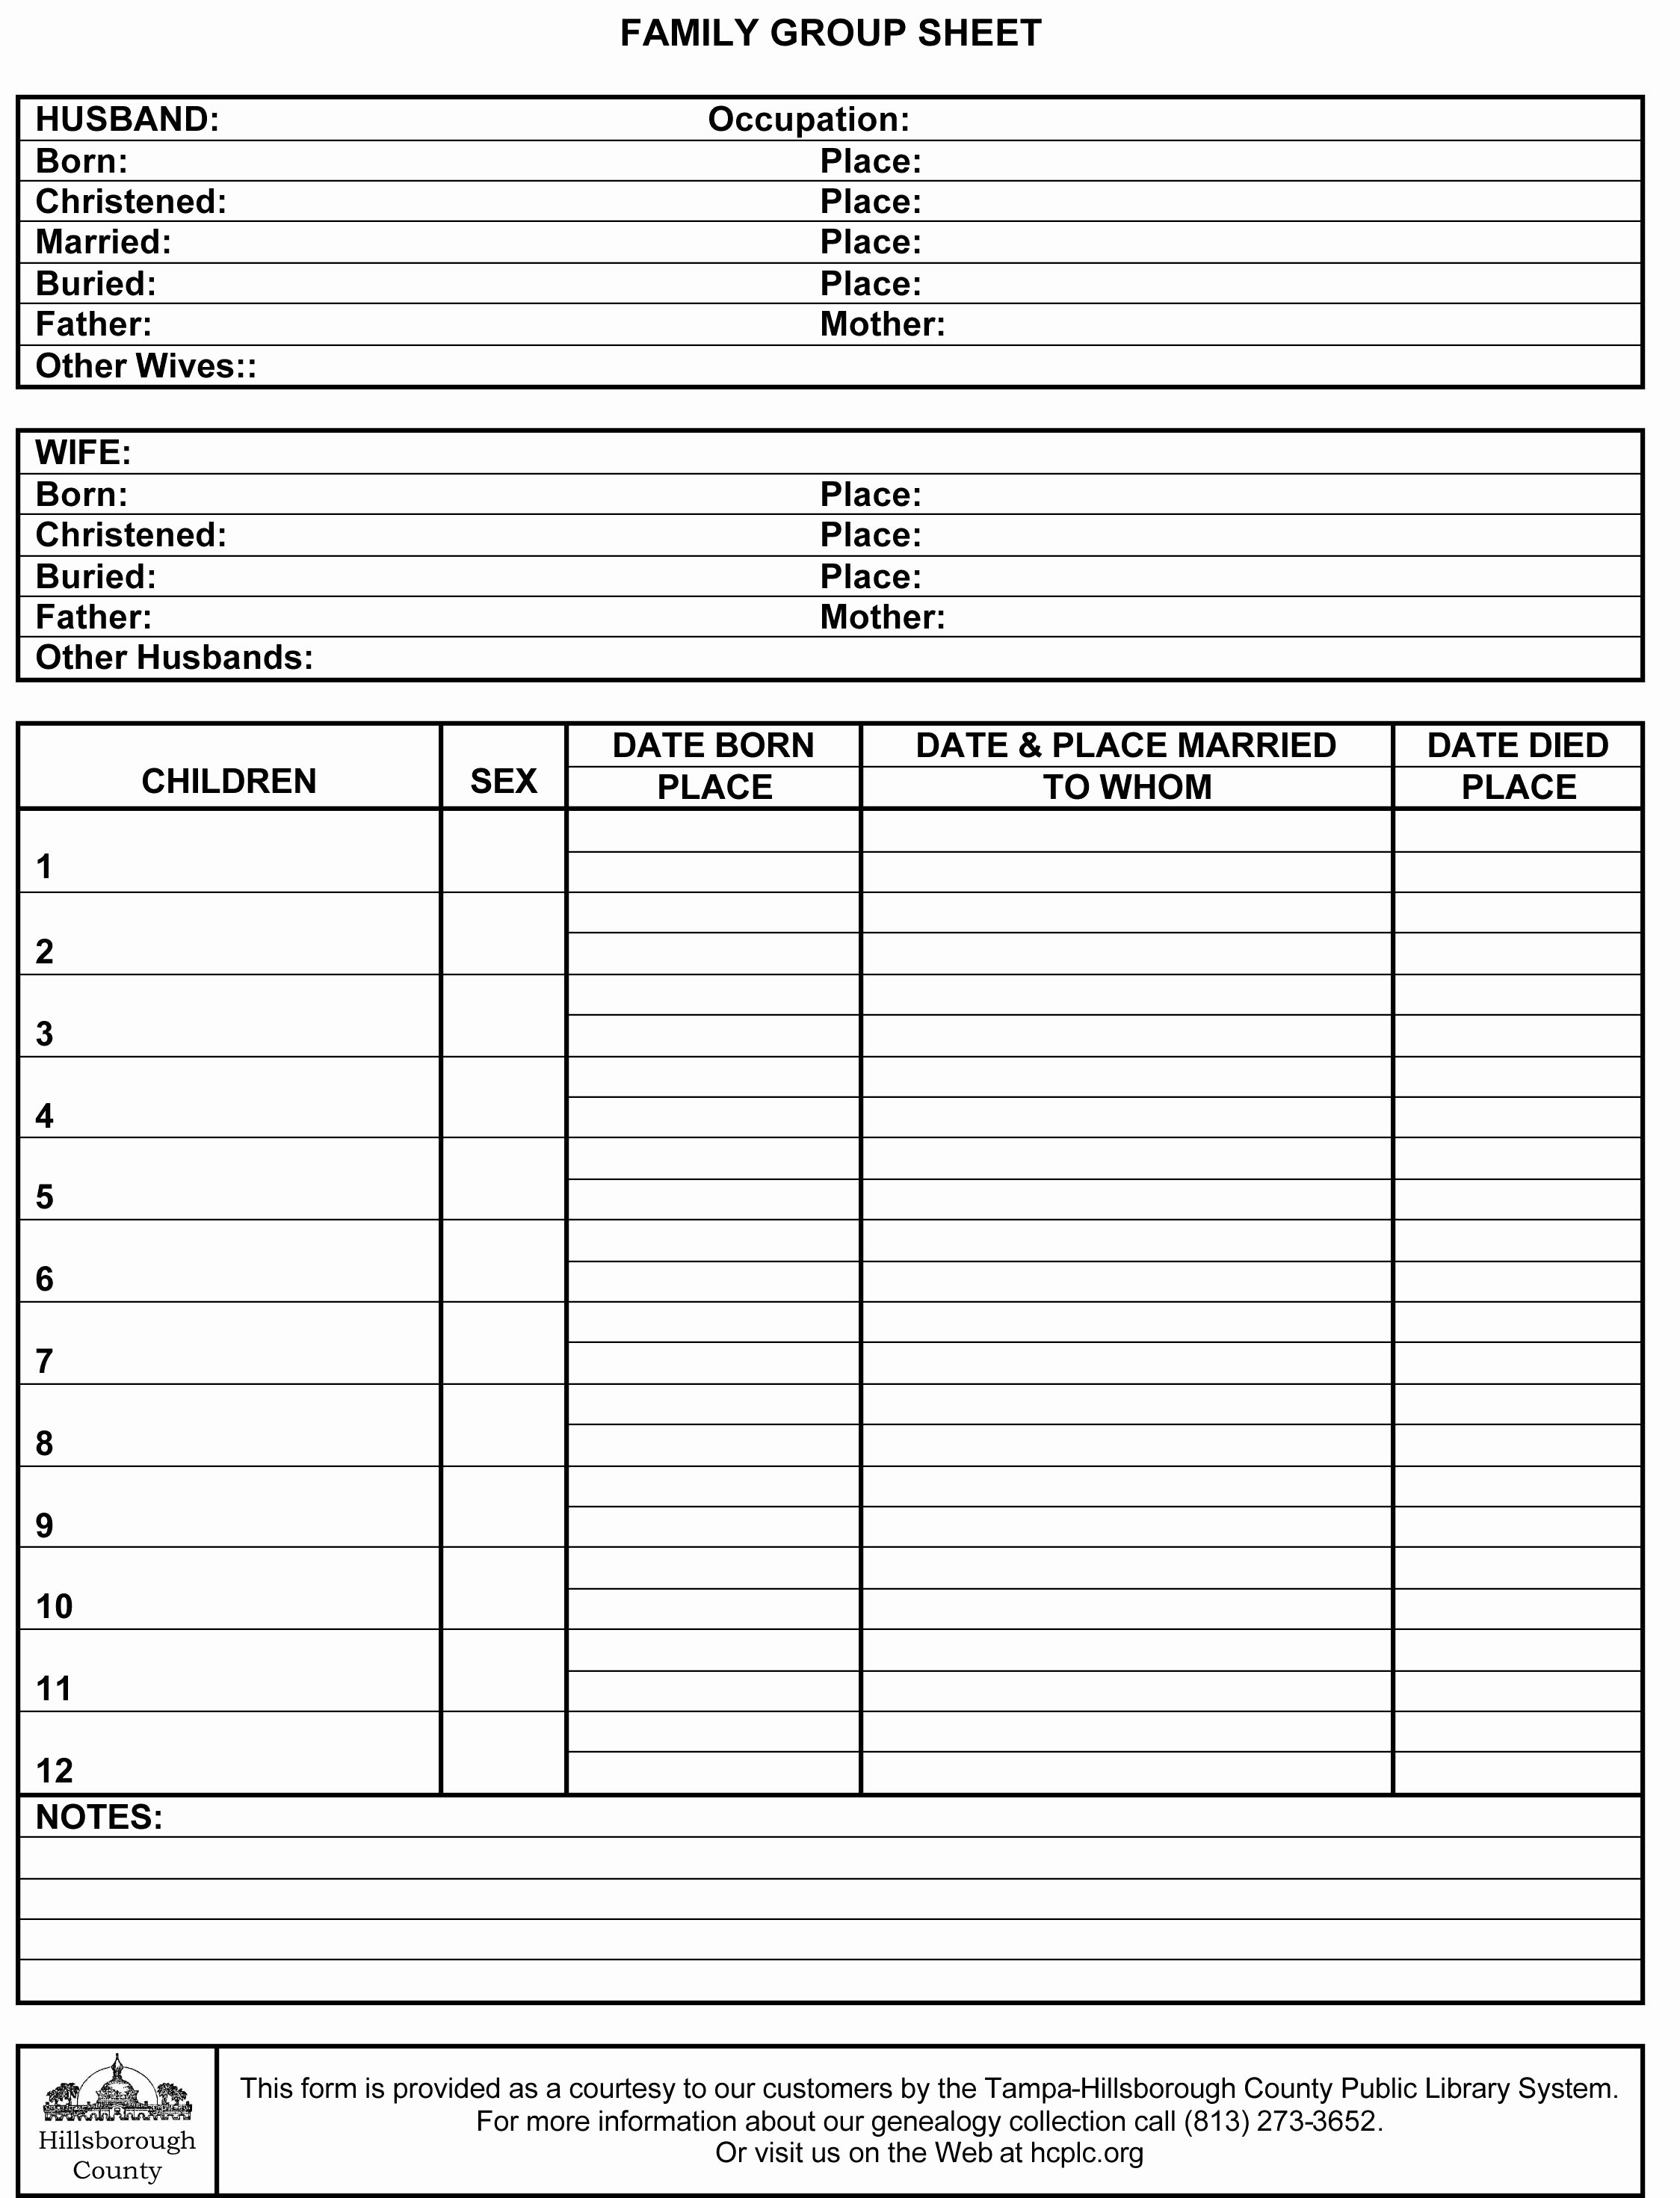 Family Group Template Inspirational Family Group Sheet Pile Information About An Ancestor